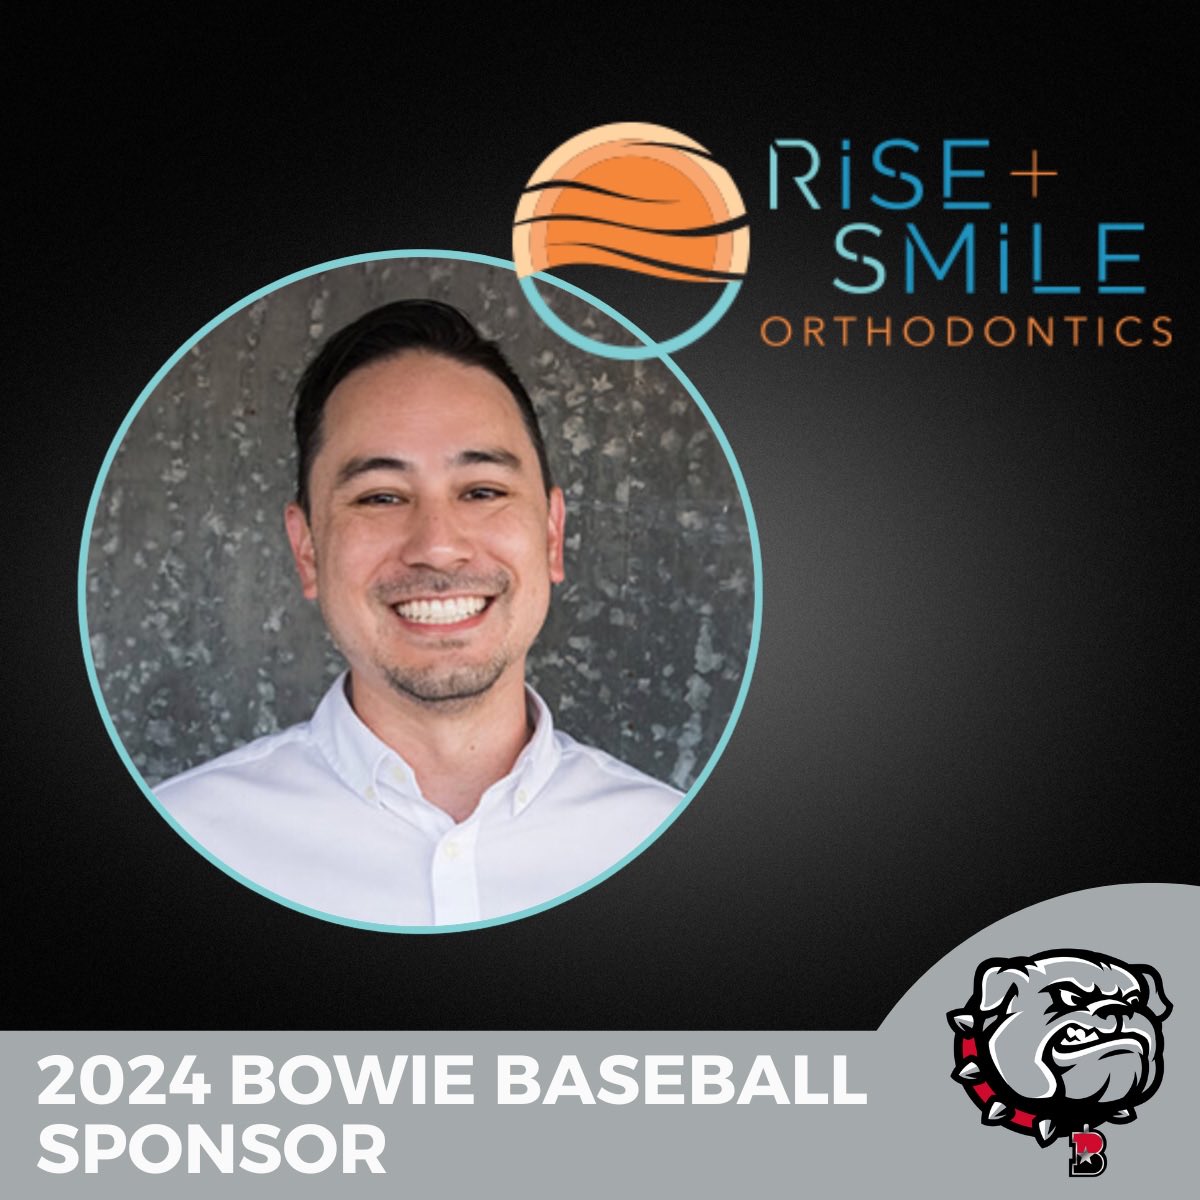 Thank you to our sponsor Rise + Smile Orthodontics for their support of Bowie Baseball!